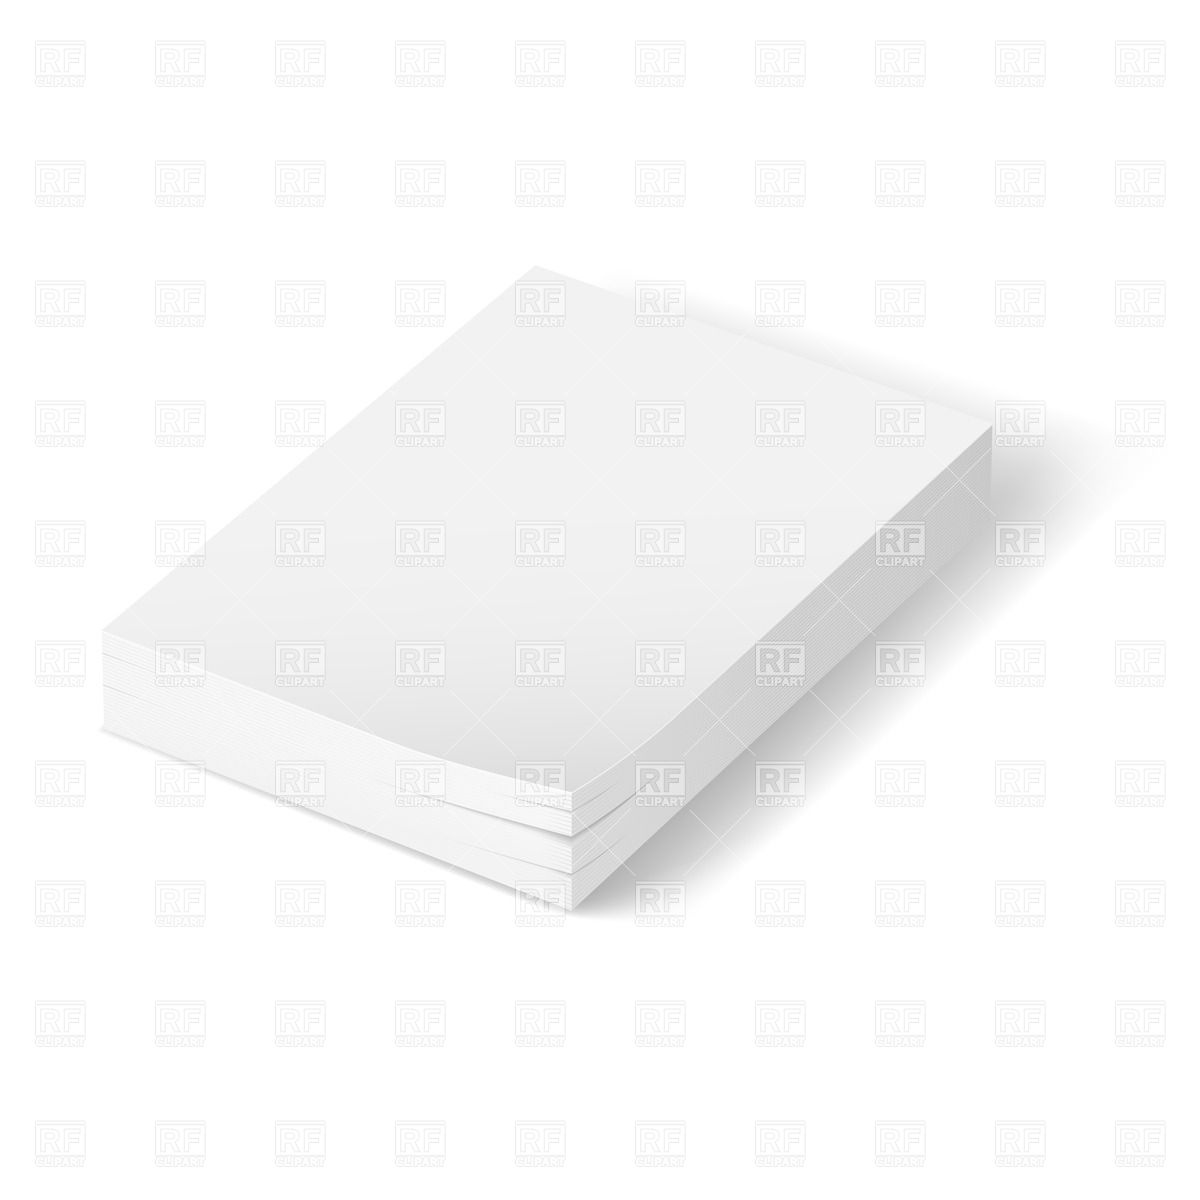     Of Blank Paper Sheets Download Royalty Free Vector Clipart  Eps